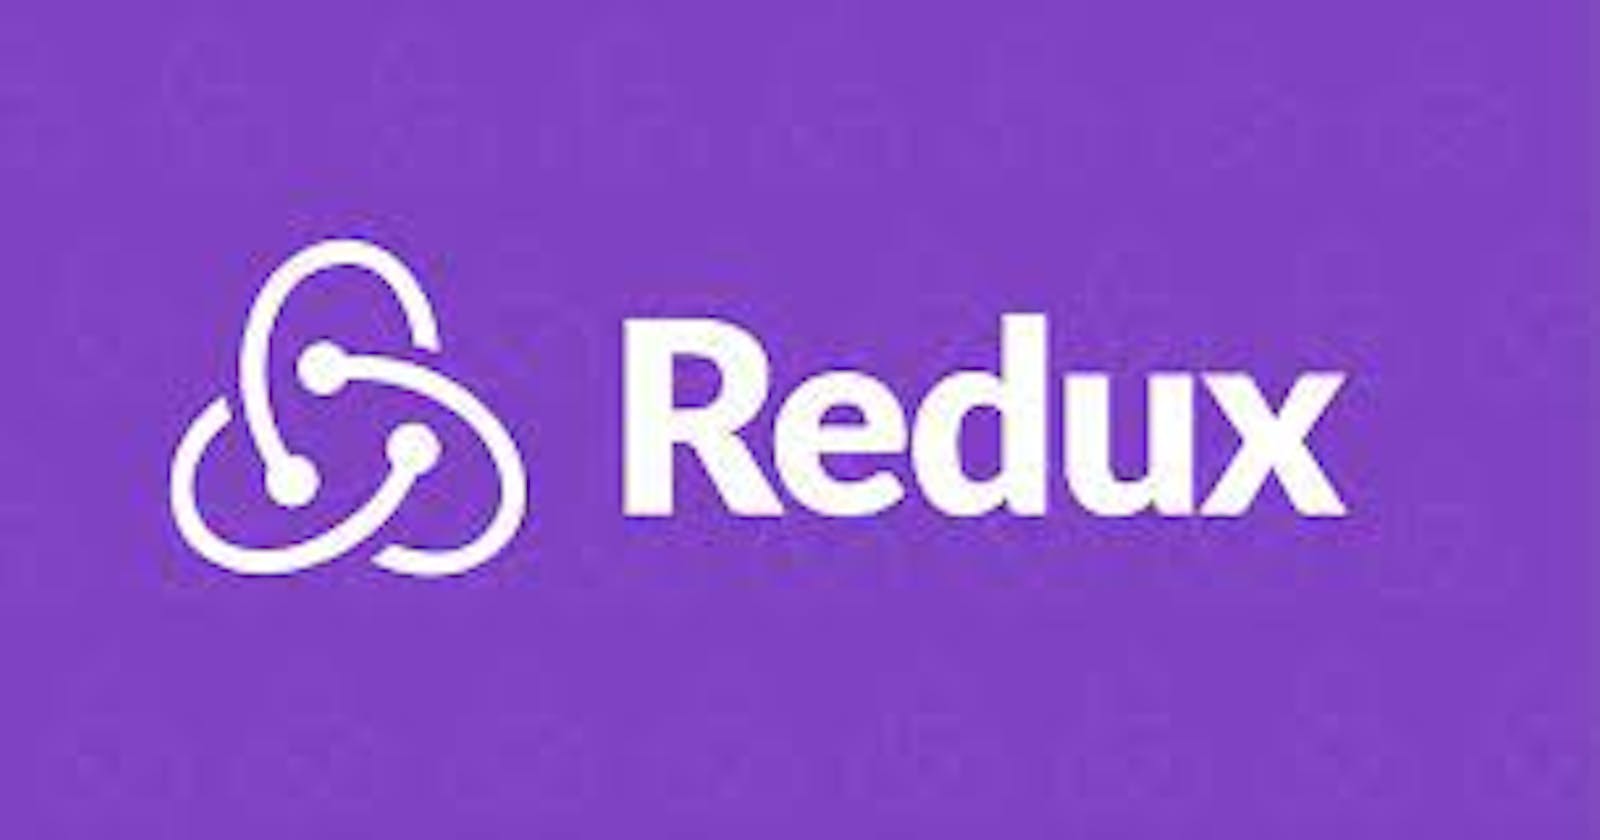 Getting started with Redux.